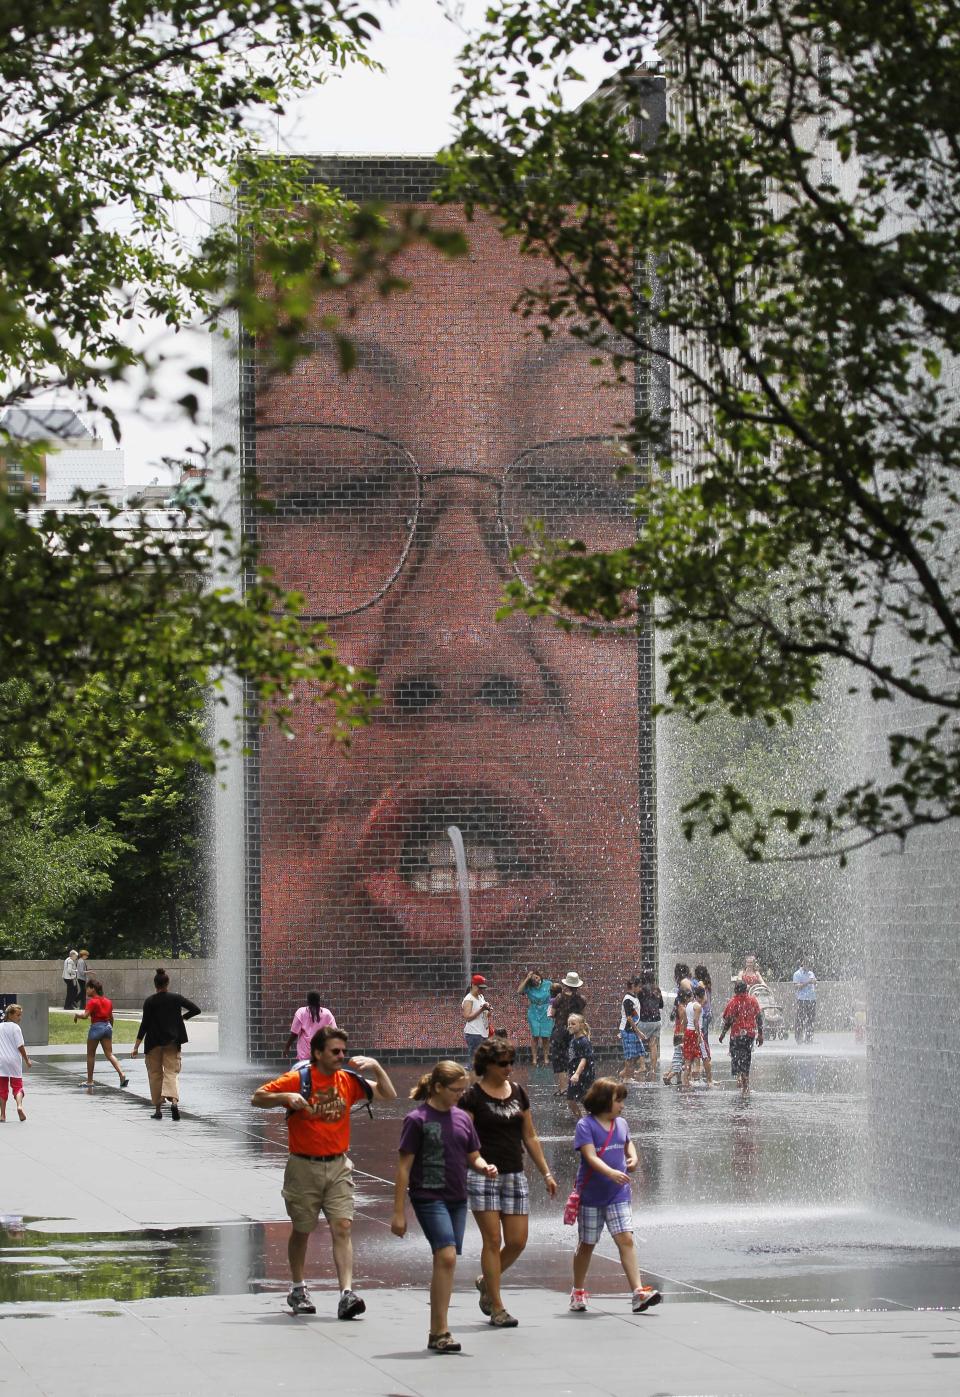 In this Wednesday, June 13, 2012 photo, visitors to Chicago's Millennium Park cool off by the Crown Fountain. Chicagoans consider Millennium Park and Grant Park the city's front yard. Both parks compromise hundreds of acres along southern Michigan Avenue filled with gardens, public art and views of the city and Lake Michigan.(AP Photo/Charles Rex Arbogast)